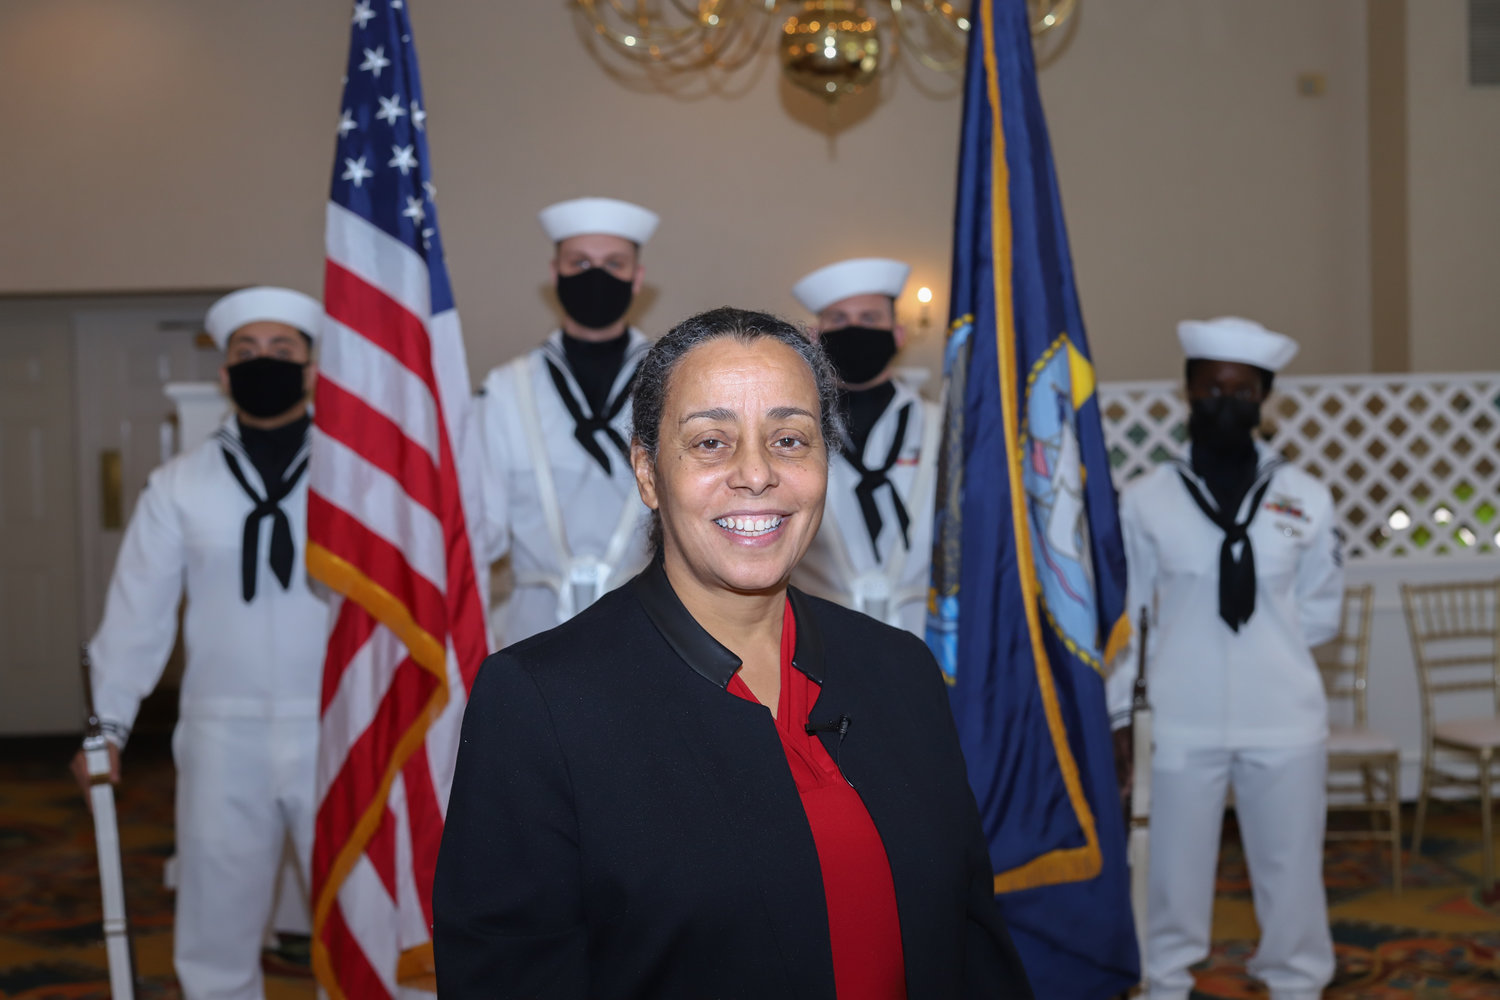 Michelle Howard, retired admiral and commander of U.S Naval Forces and Africa, was greeted by an honor guard at her visit in Bucks County Sept. 29.